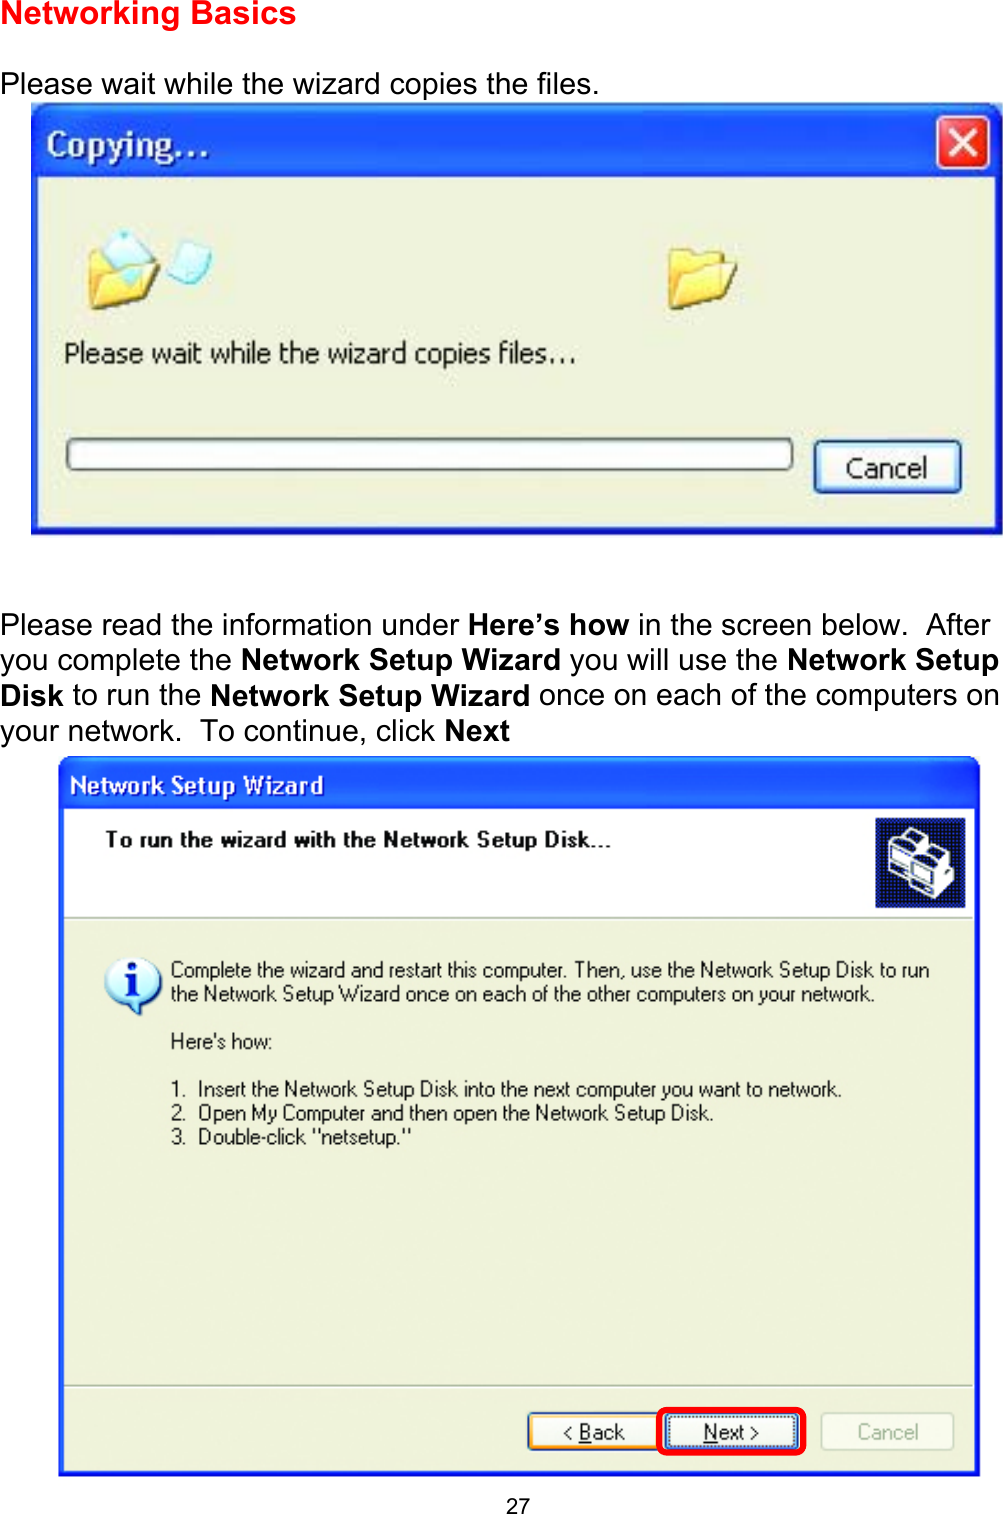  27Networking Basics   Please wait while the wizard copies the files.    Please read the information under Here’s how in the screen below.  After you complete the Network Setup Wizard you will use the Network Setup Disk to run the Network Setup Wizard once on each of the computers on your network.  To continue, click Next   